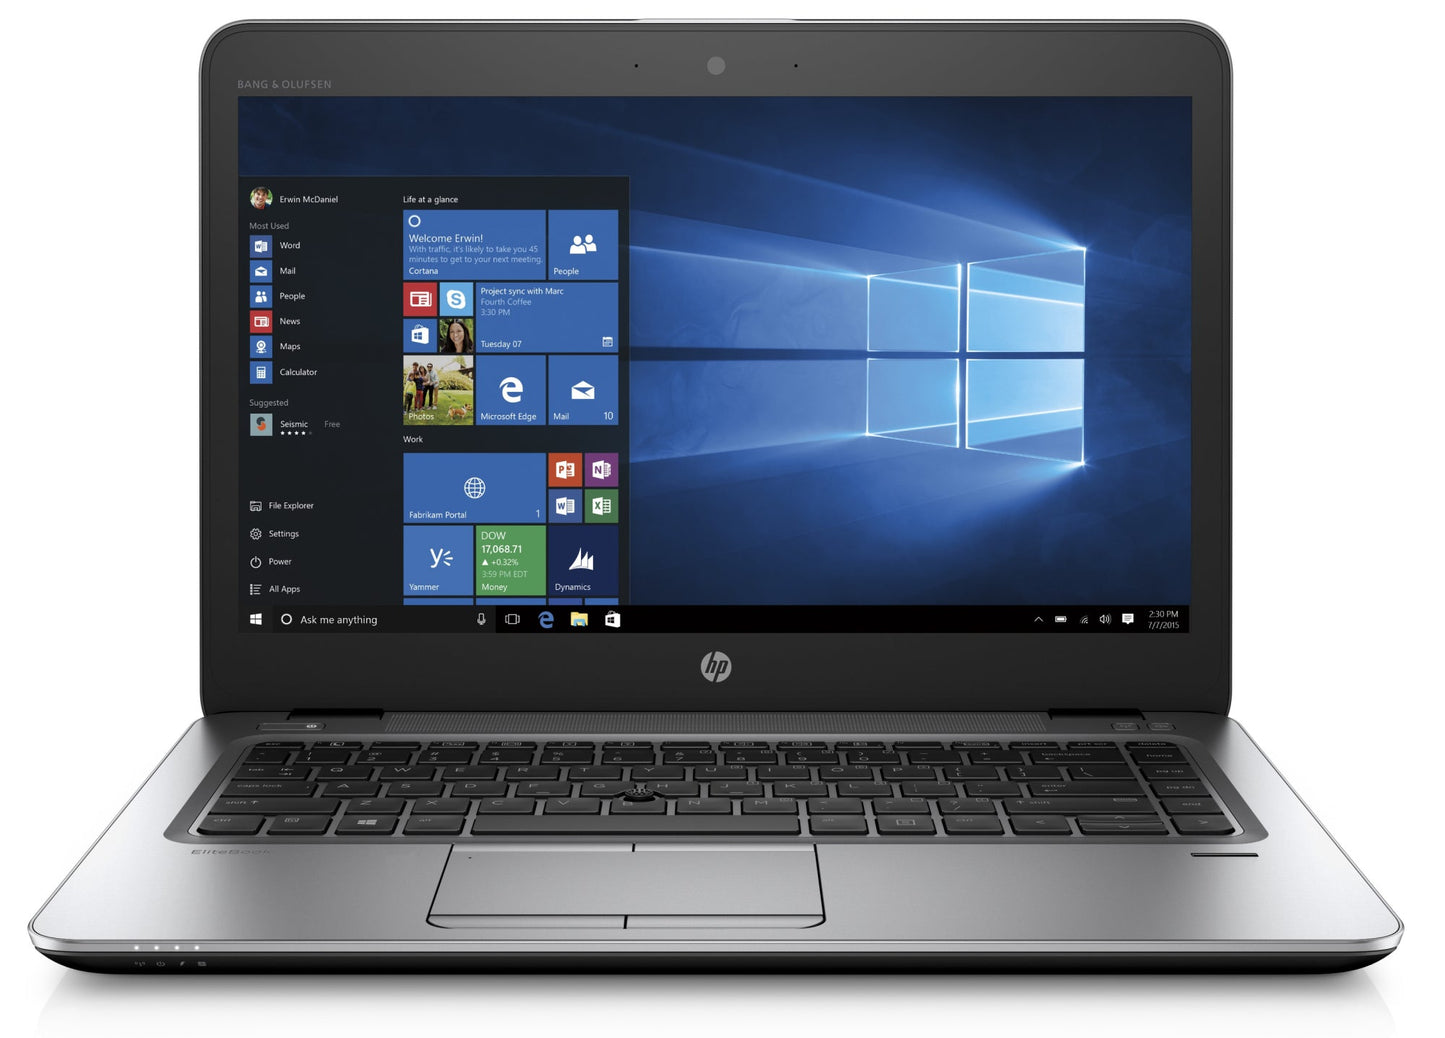 hp elitebook mt43 14" laptop- 2.4ghz quad core amd a8, 8gb-32gb ram, hard drive or solid state drive, win 10 pro by computers 4 less